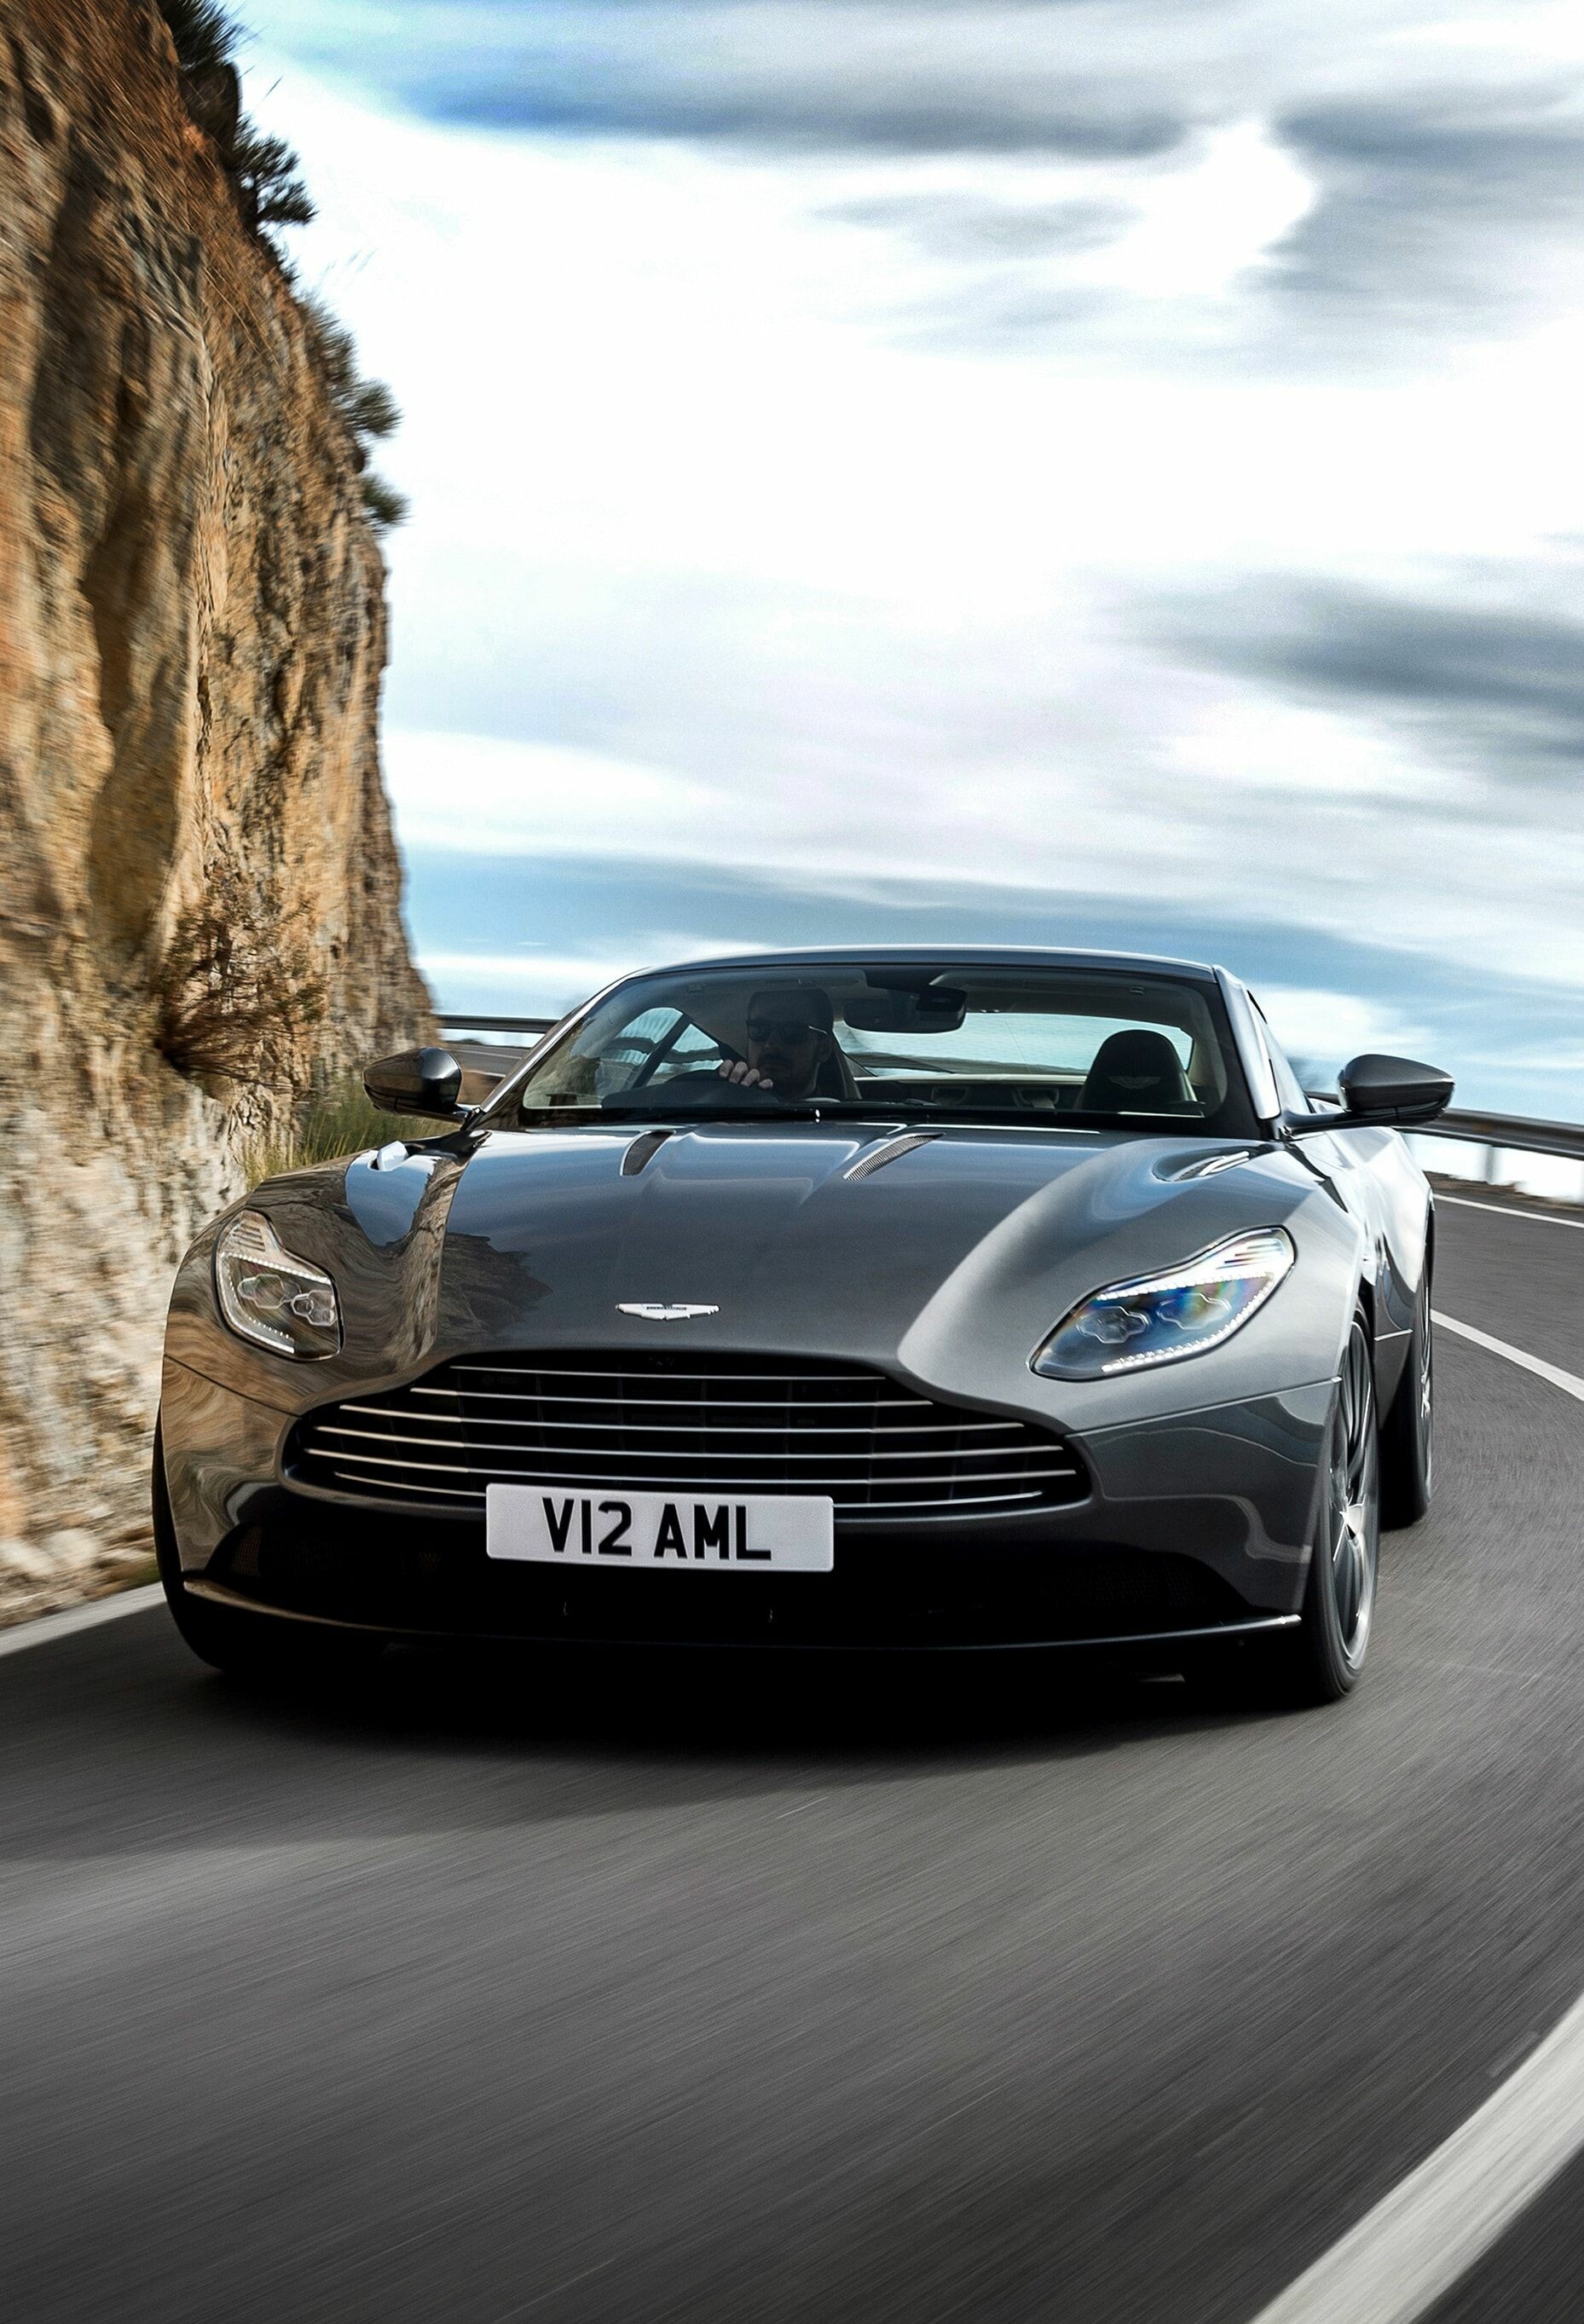 Aston Martin: Known for luxury design and automotive excellence heritage of more than 100 years. 1860x2730 HD Background.